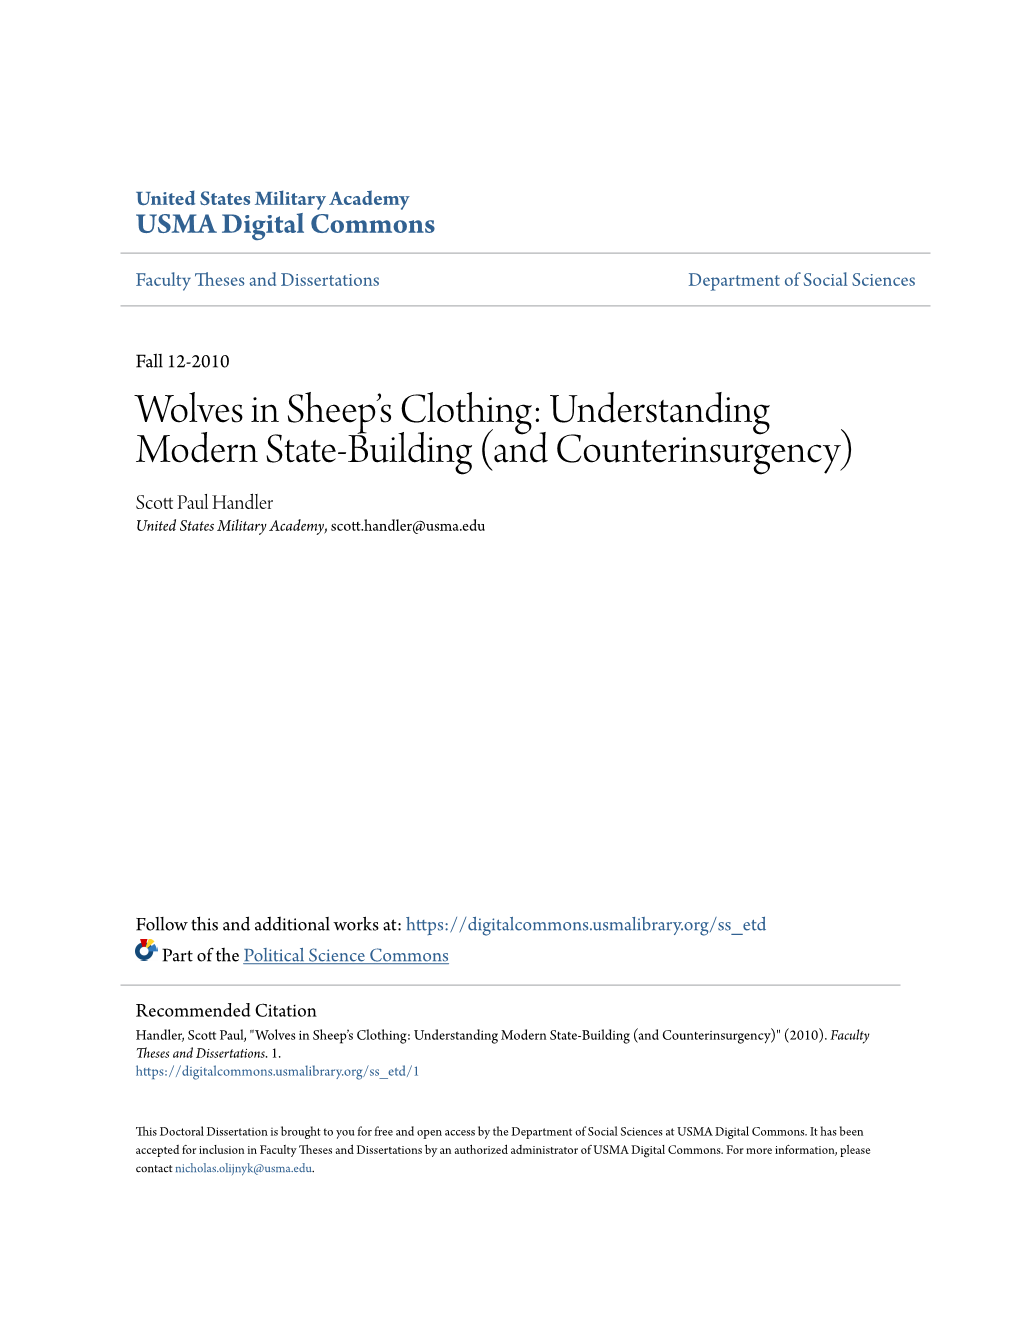 Wolves in Sheep's Clothing: Understanding Modern State